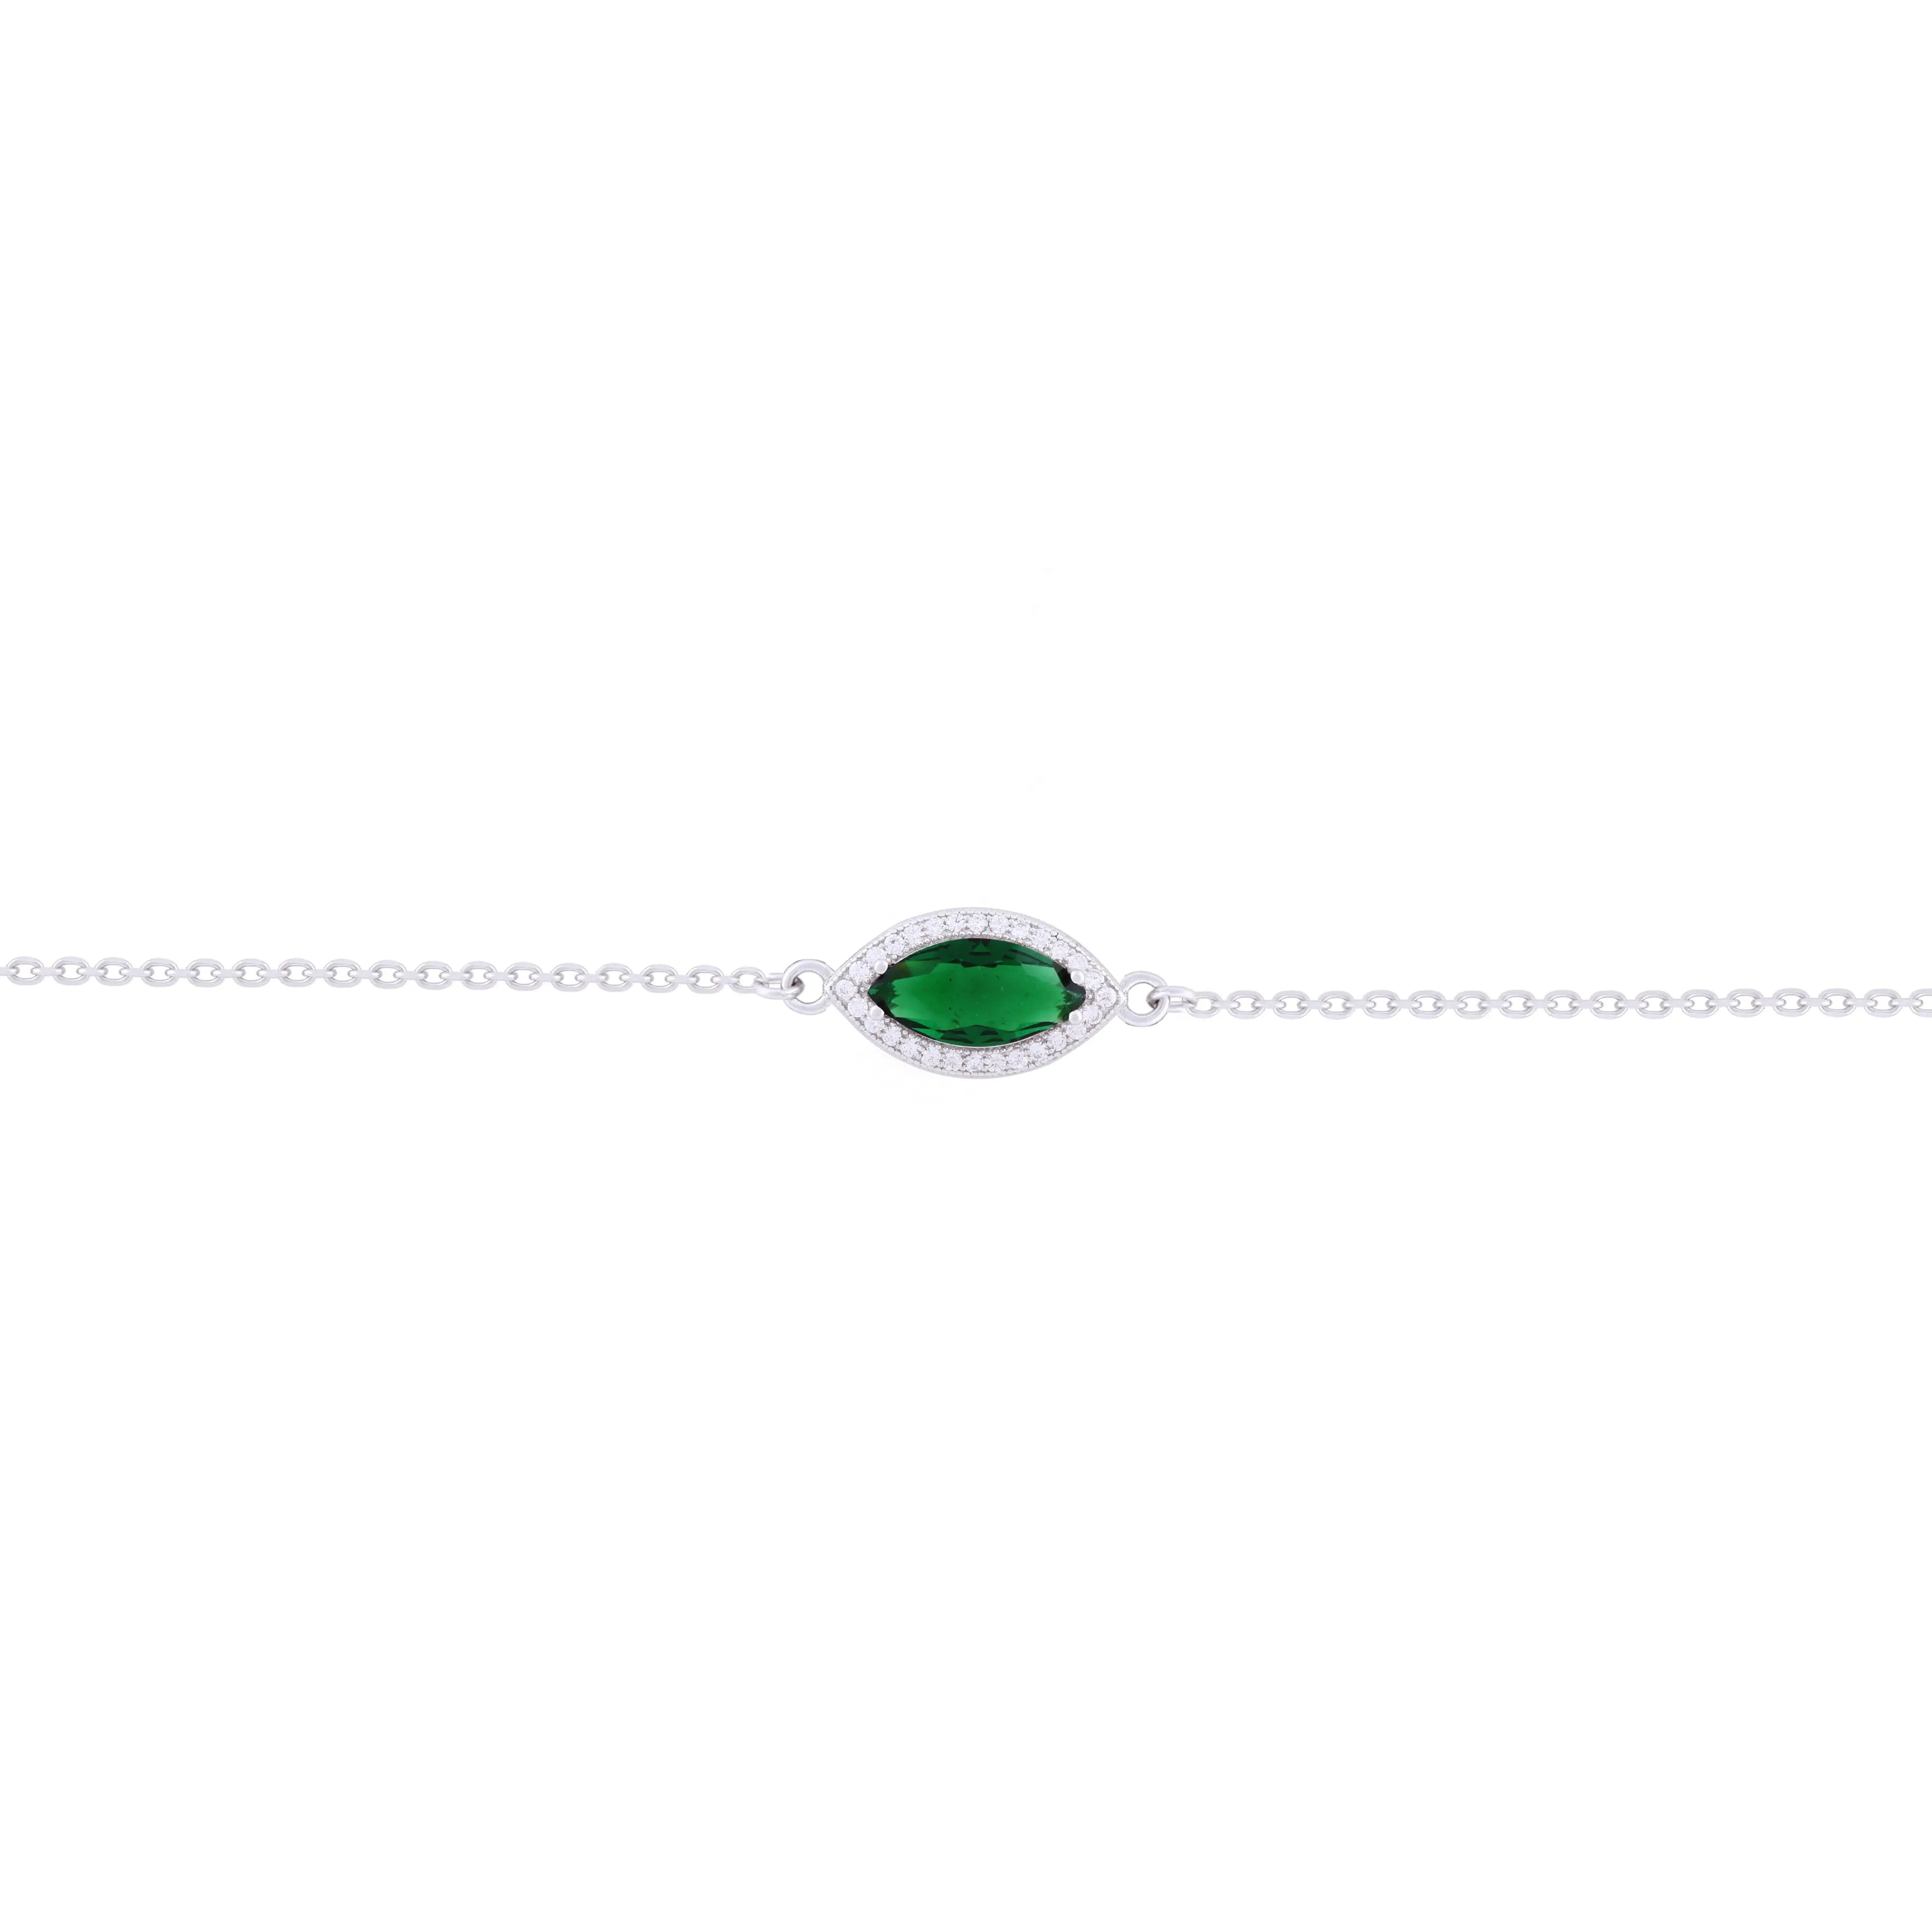 Asfour Chain Bracelet with Green Zircon Stone In 925 Sterling Silver